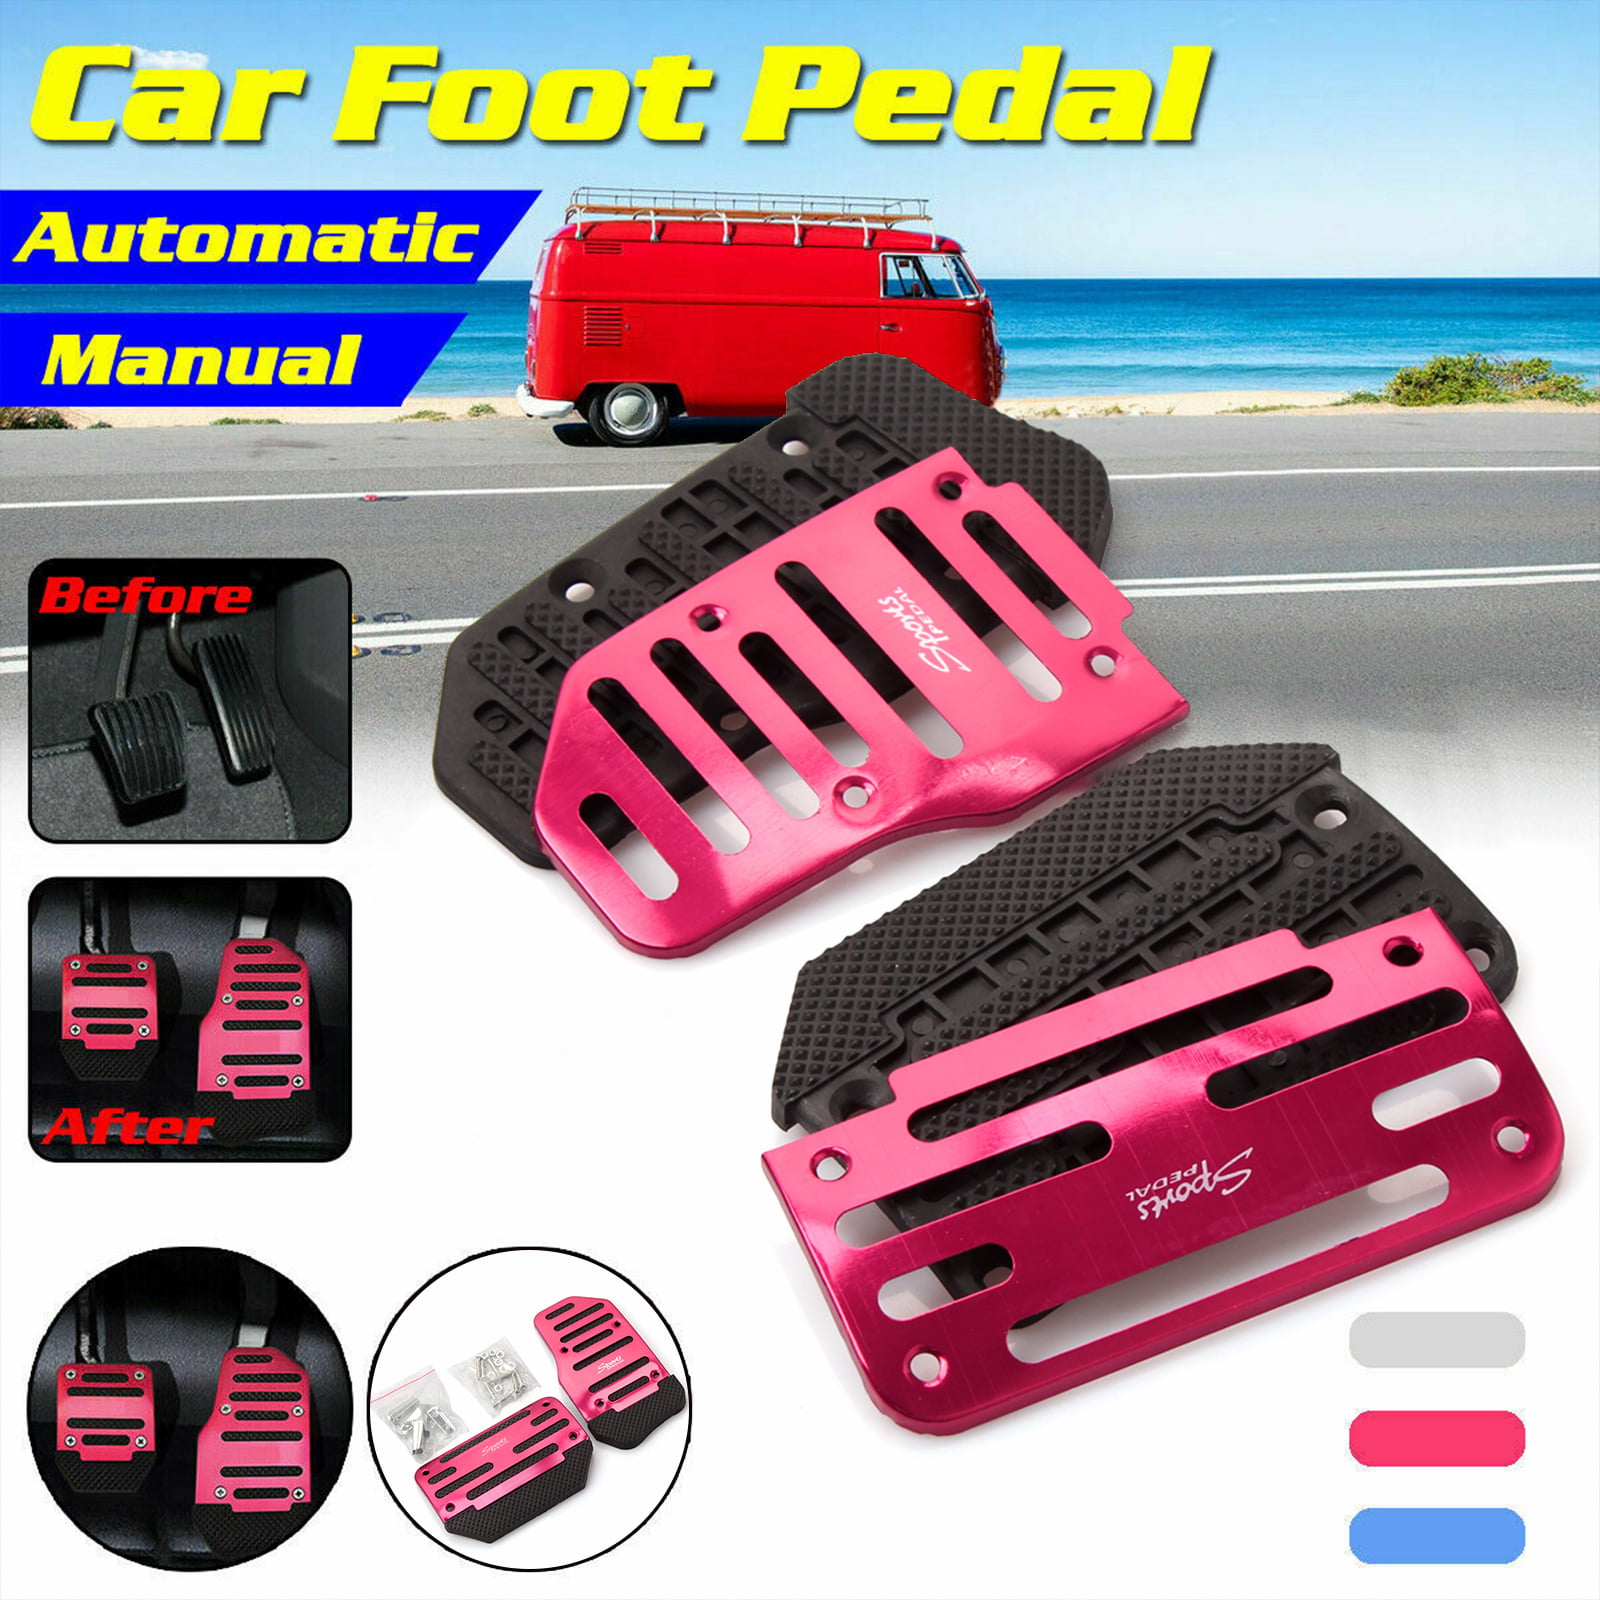 Neon Foot Pushing the Pedal Gas Pedal Brake Pedal Auto Service